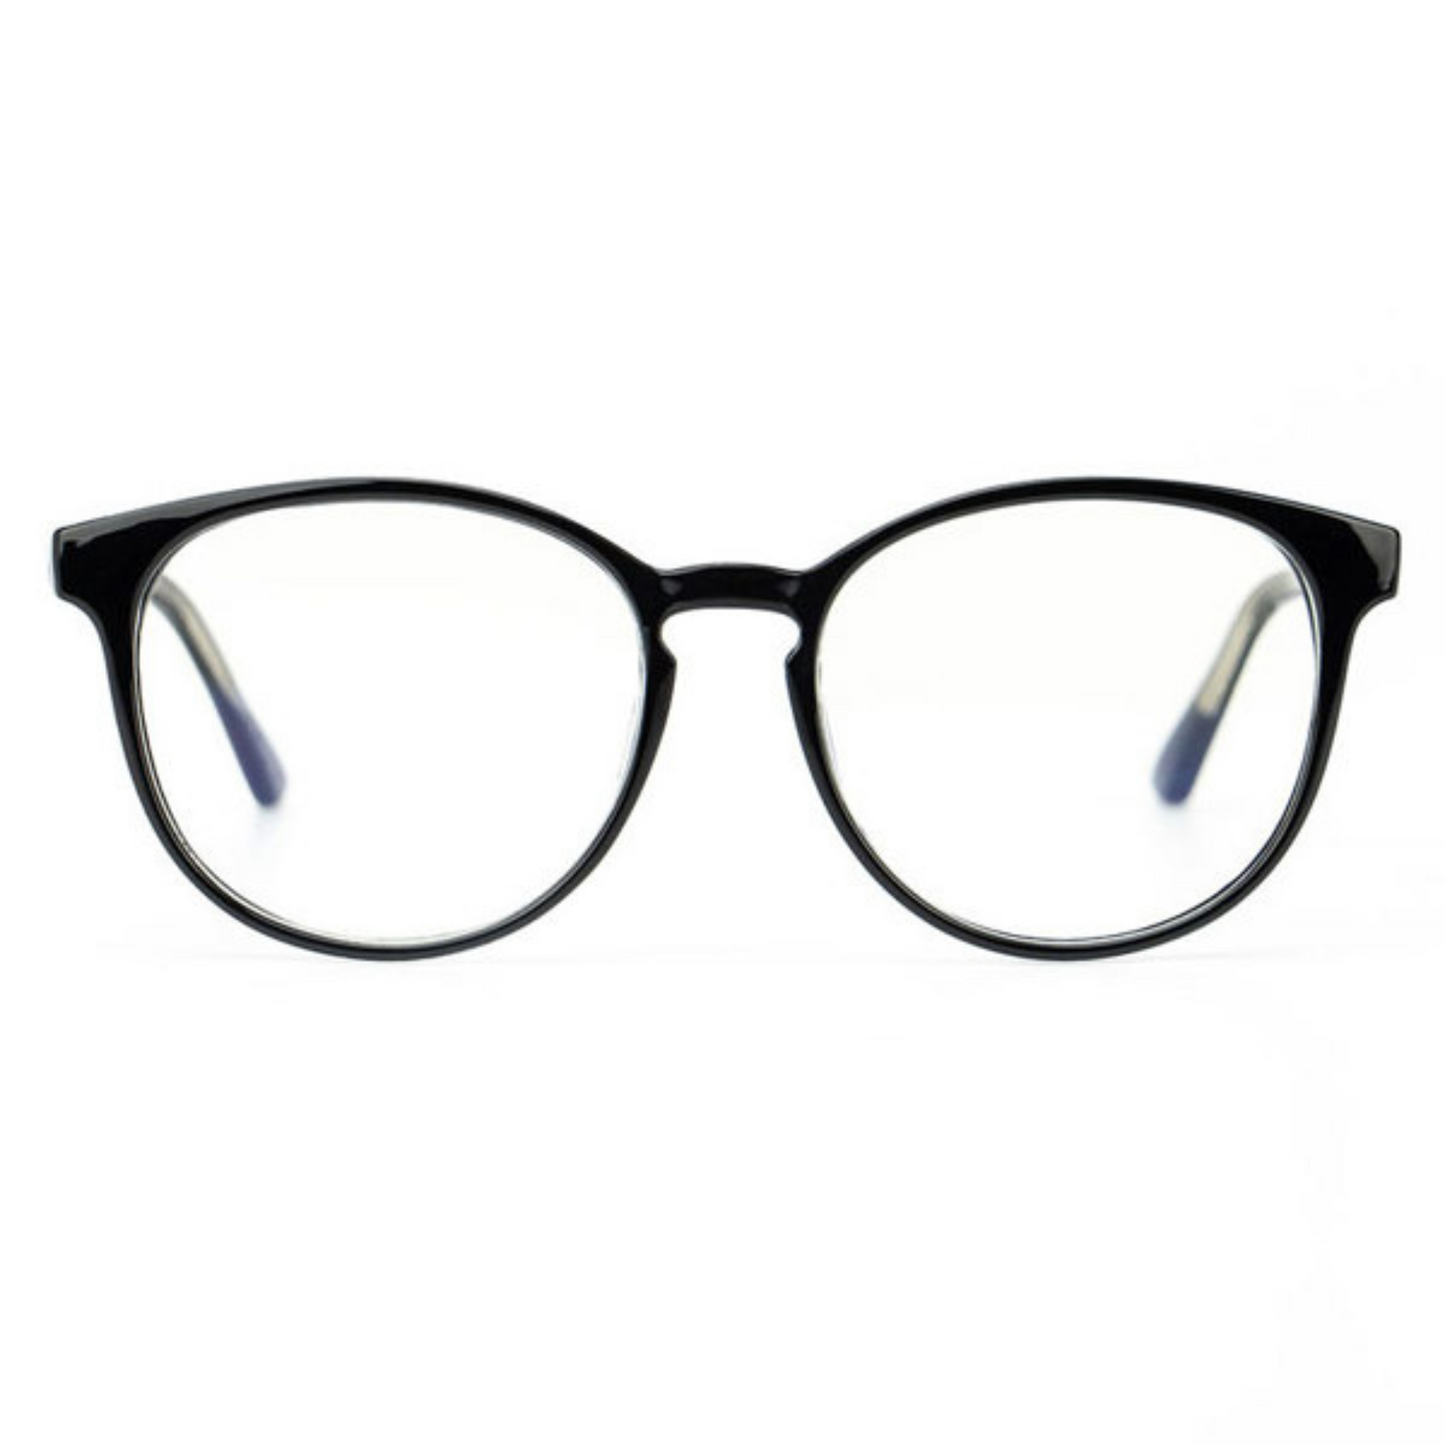 Thin black rimmed reading glasses. This style is called Daydream